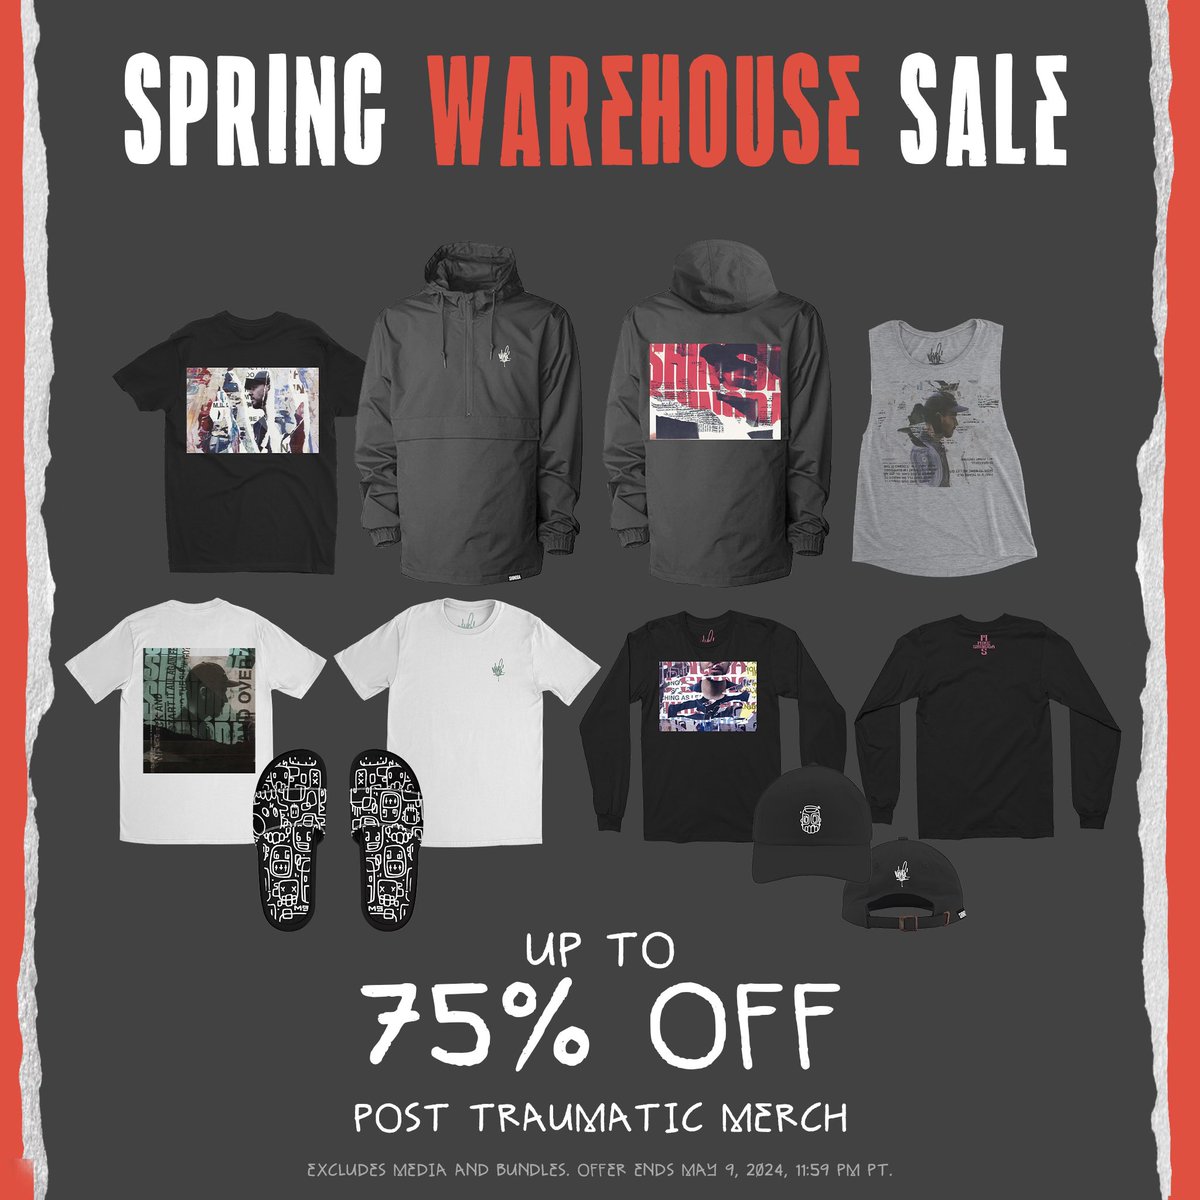 Spring warehouse sale happening now through May 9th. Up to 75% off select items mshnd.co/store